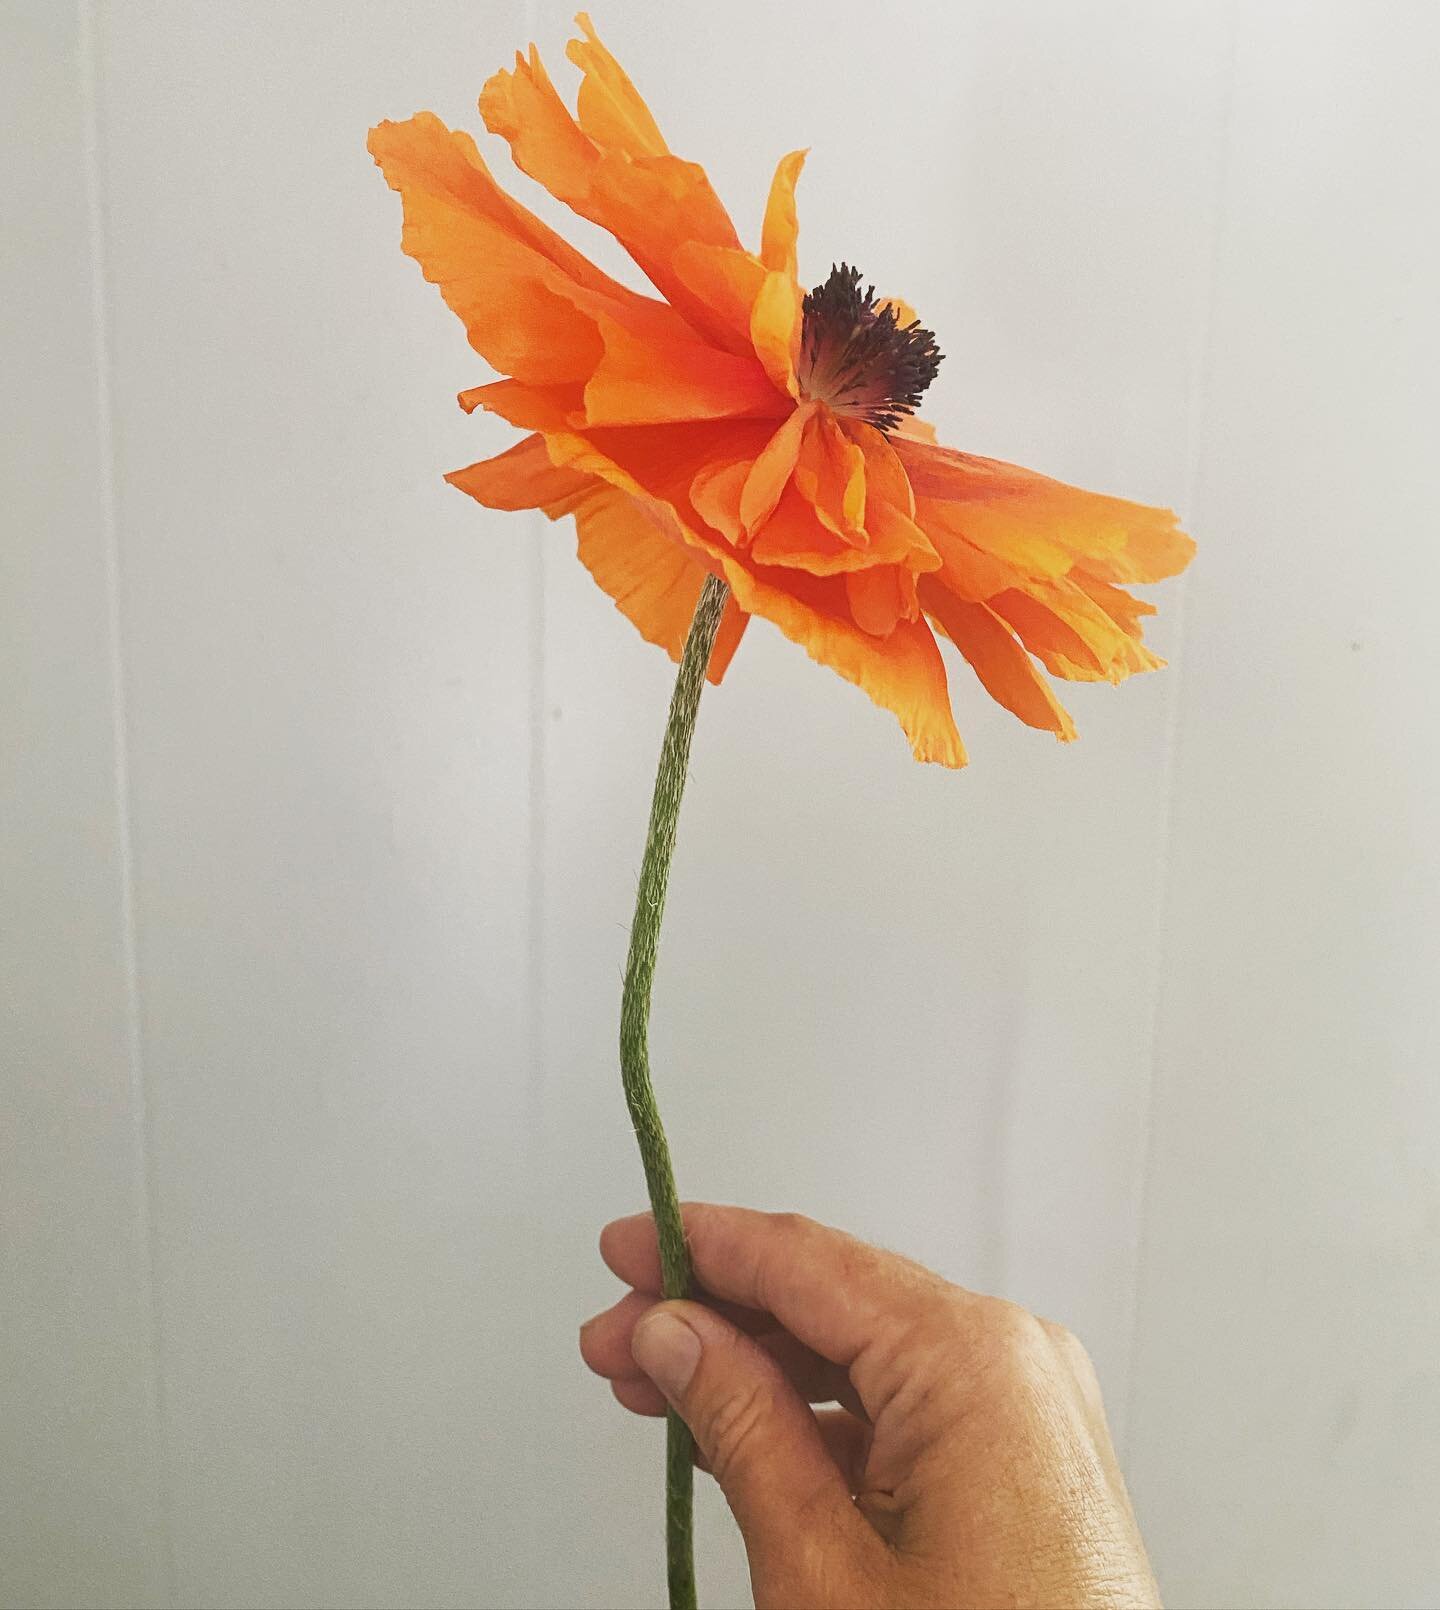 It&rsquo;s poppy season, and this wild, tangerine color makes me crazy happy. This is my first year of success with poppies, and I can&rsquo;t wait to share them with you all as more open up their papery petals.